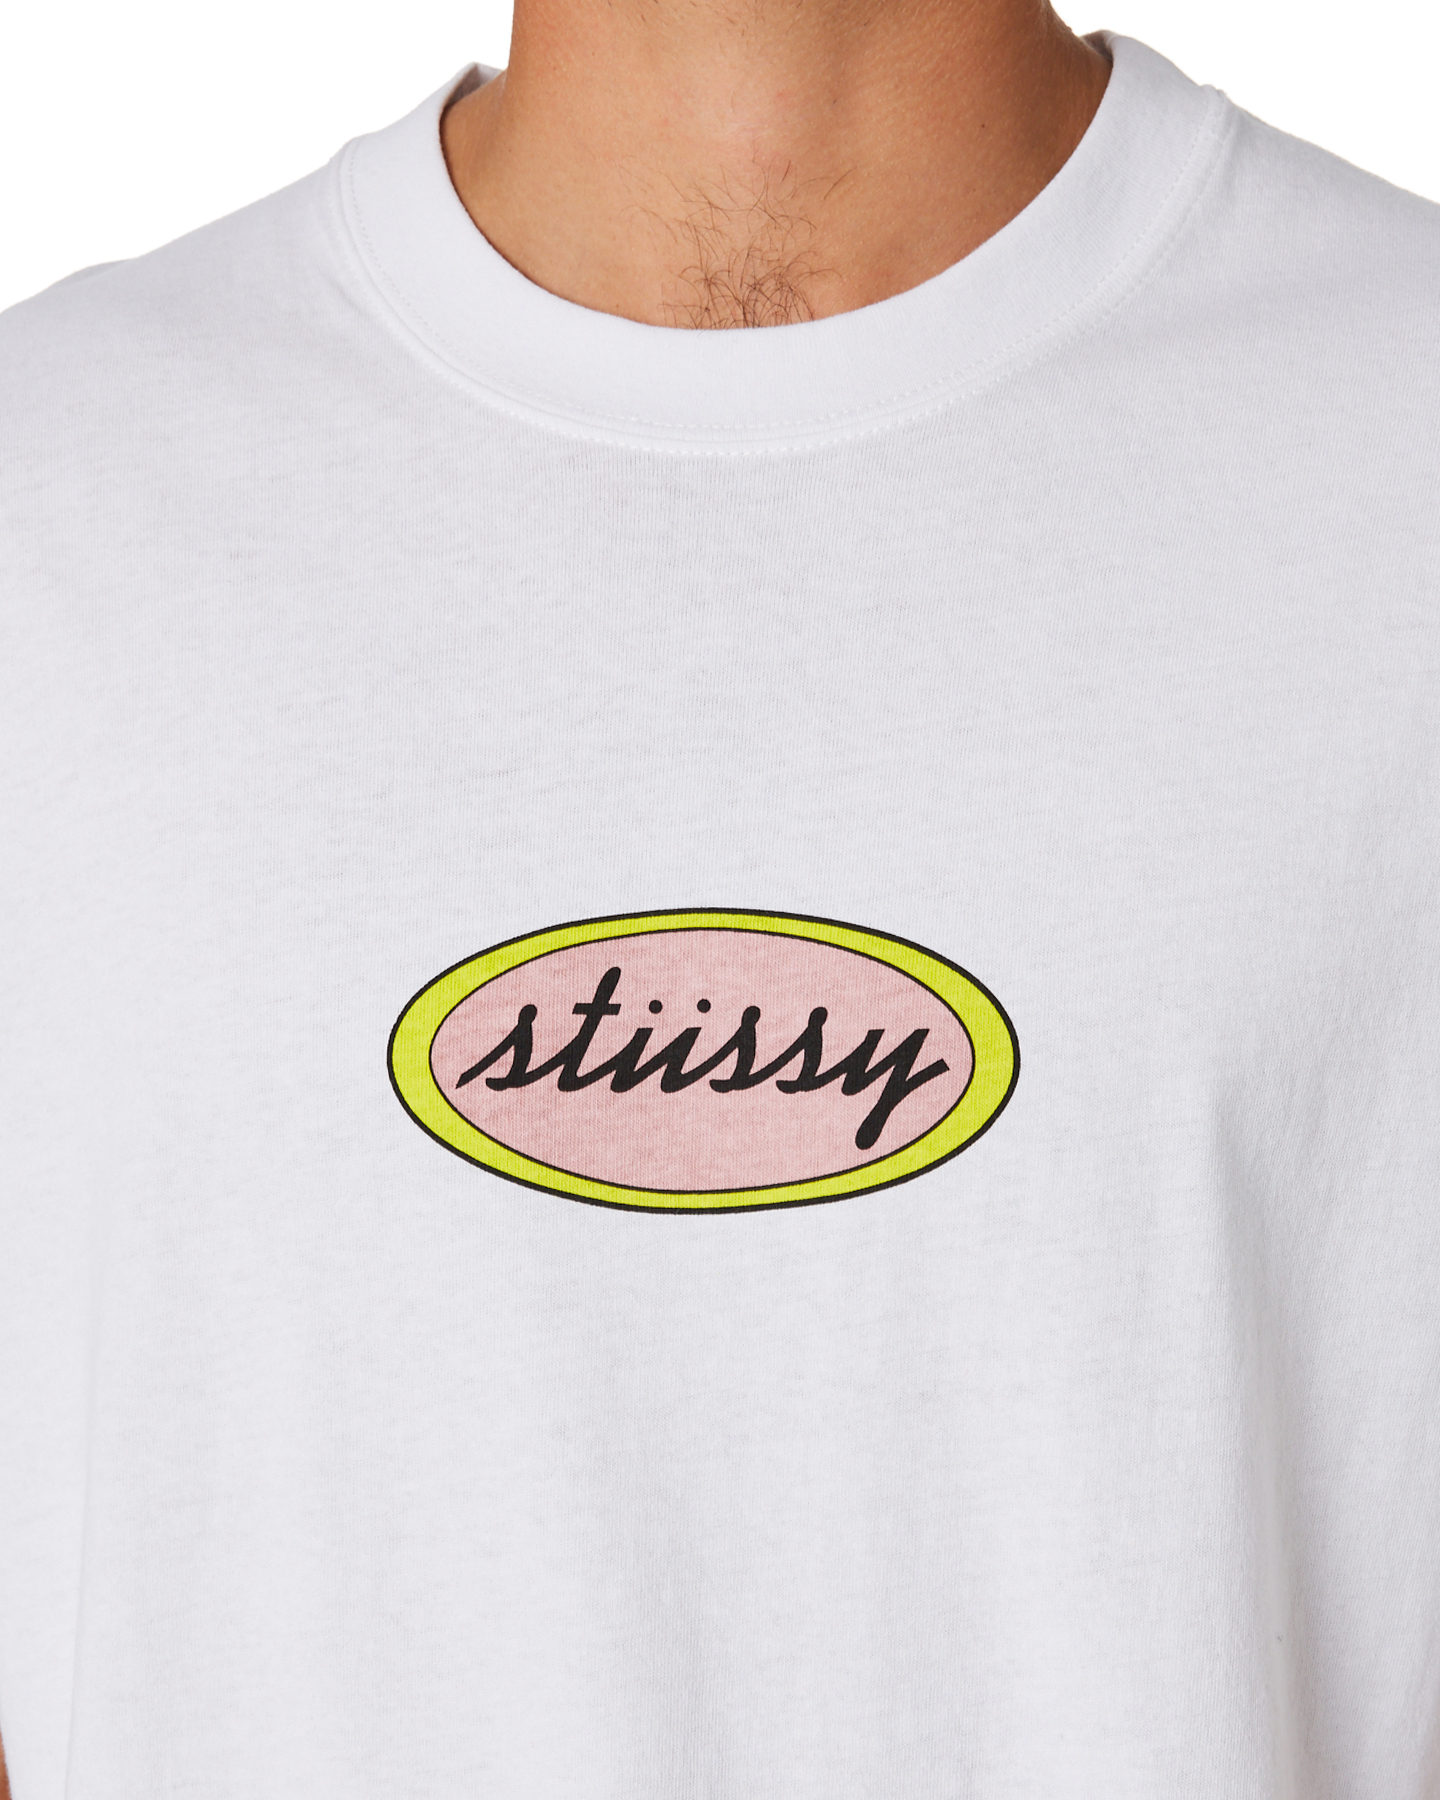 Stussy Oval Mens Tee - White | SurfStitch